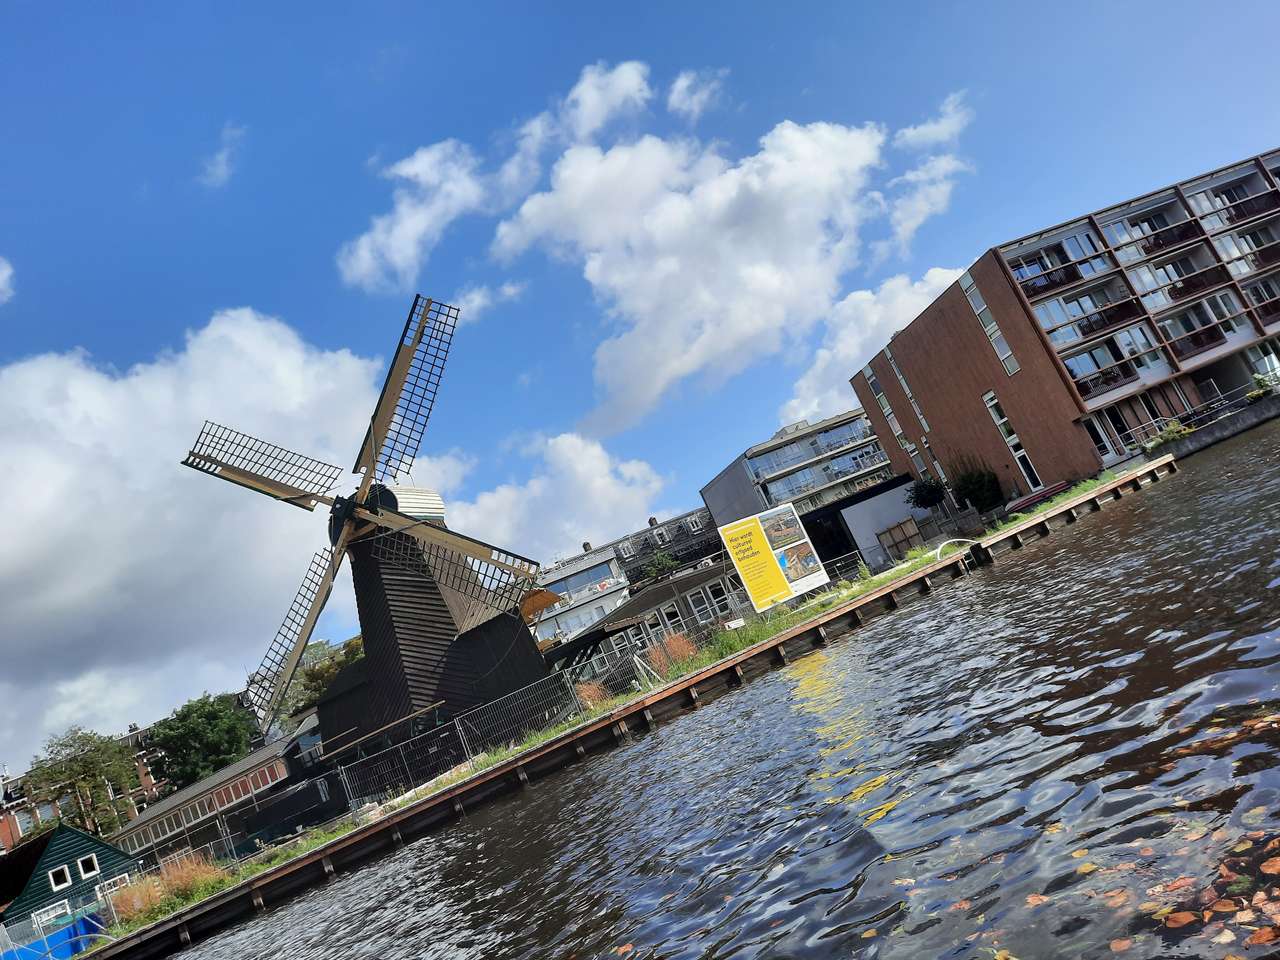 A'DAM canals puzzle online from photo